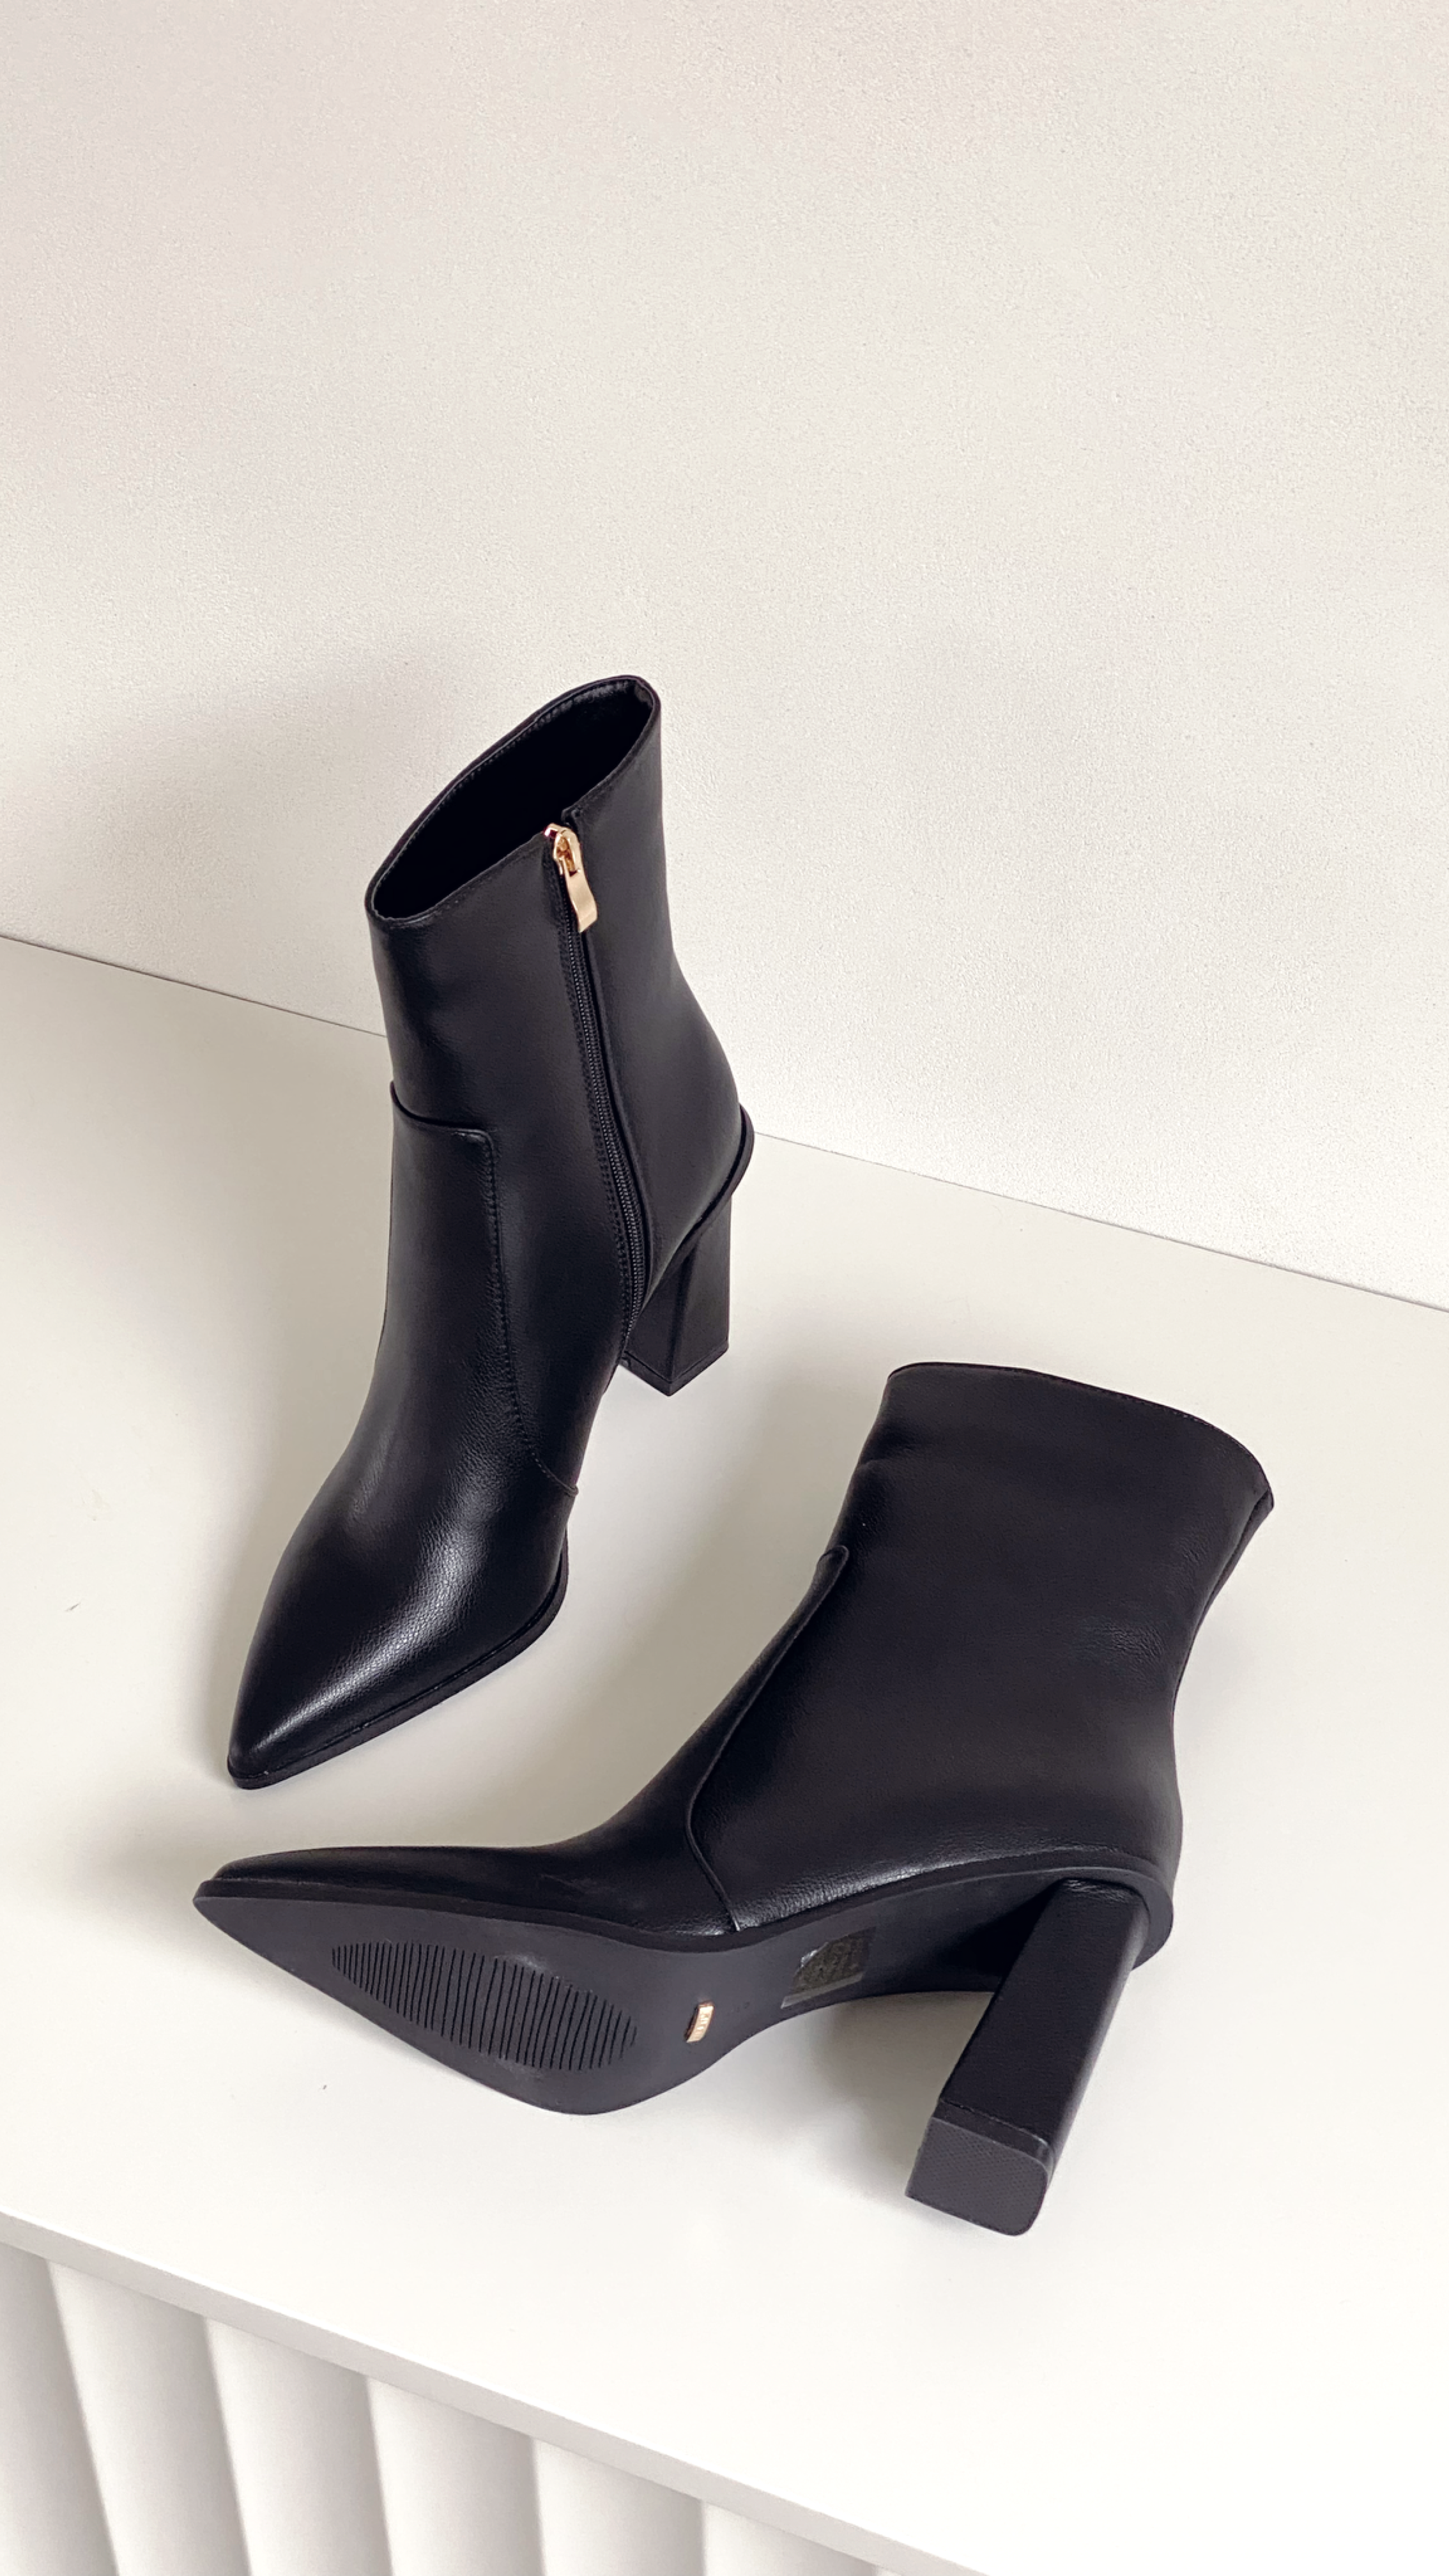 Mirie Boots - Black